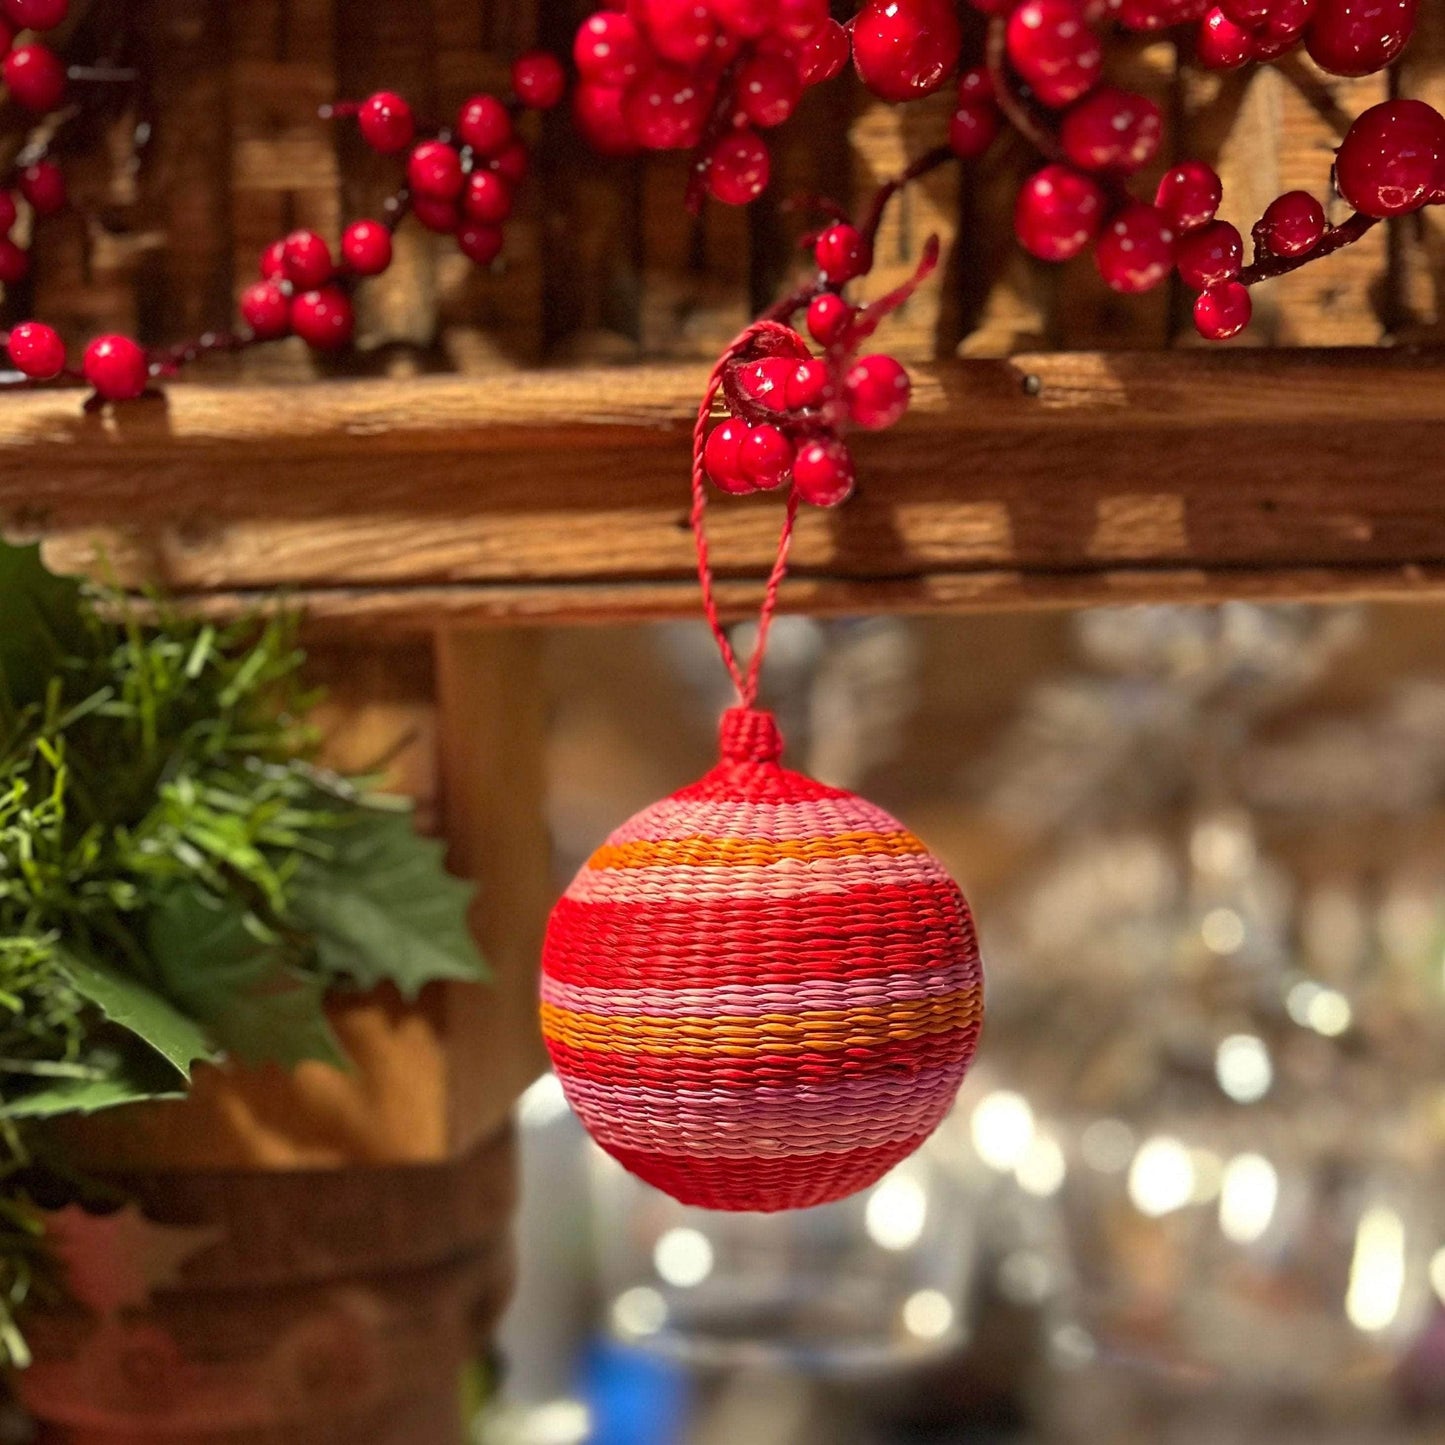 Palmito Woven Baubles (Set of 4)